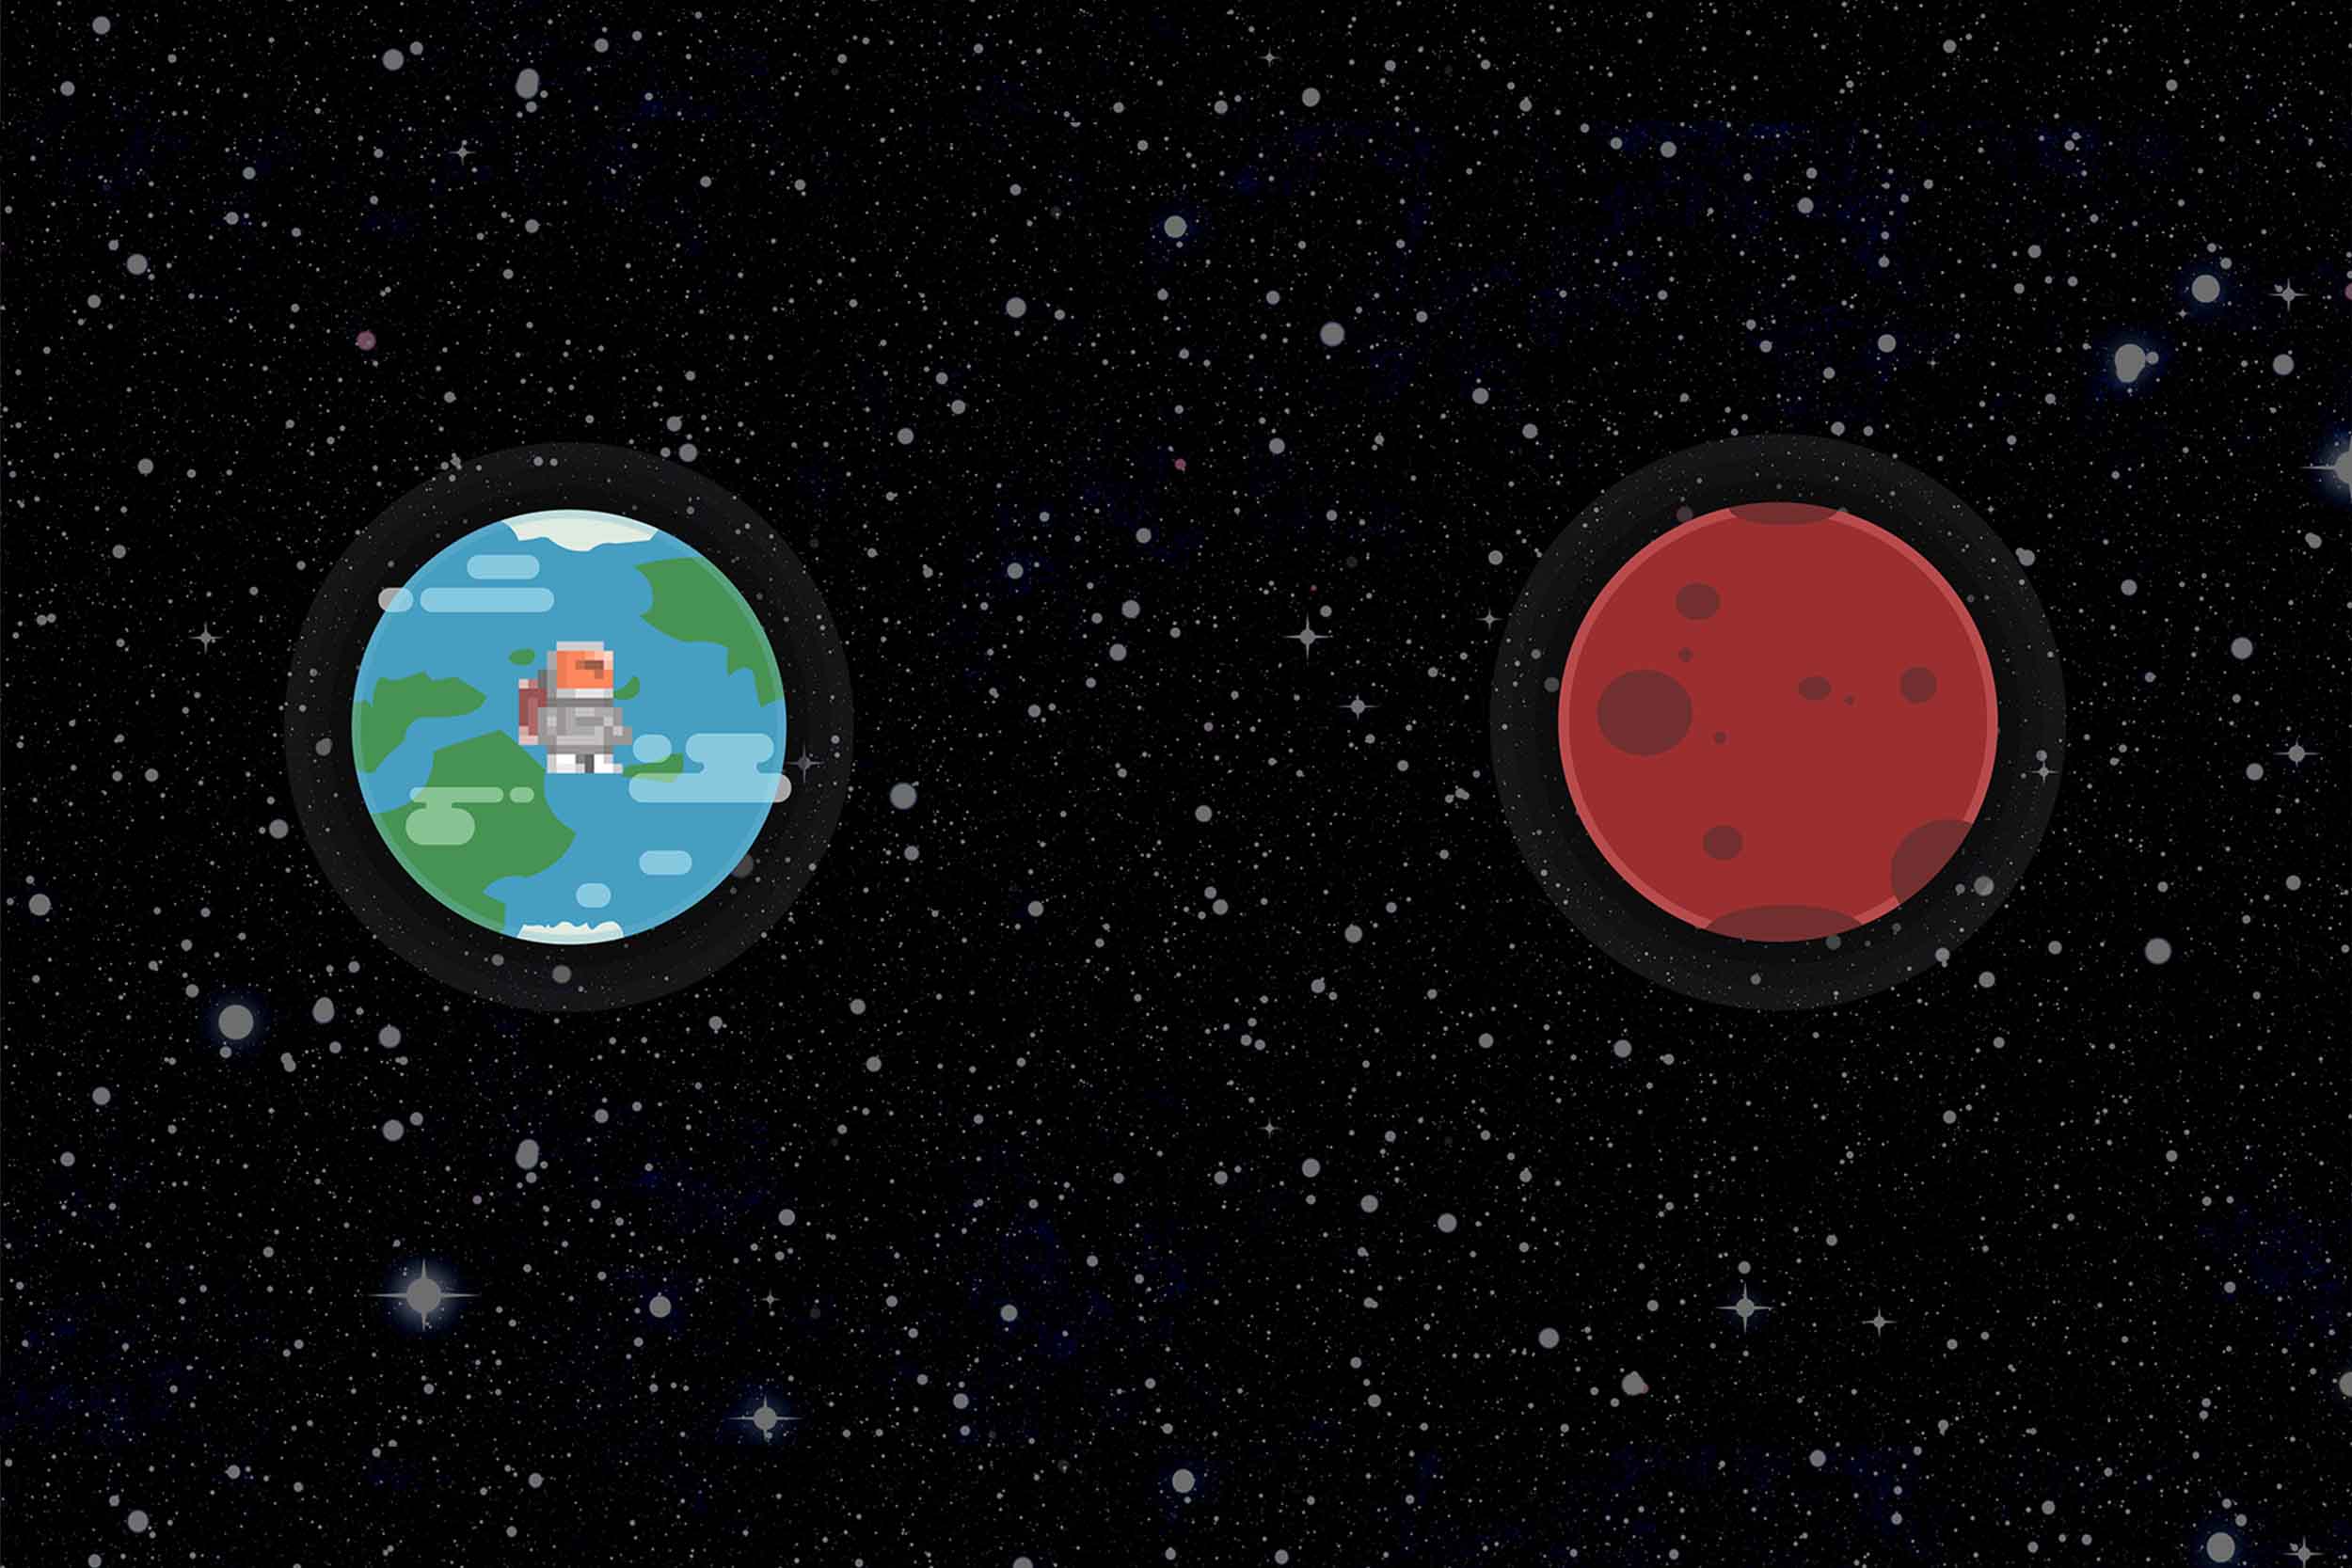 Screenshot from the video game used in Hooyman's research on motor control. Earth is shown on the left and Mars on the right on a field of space and stars